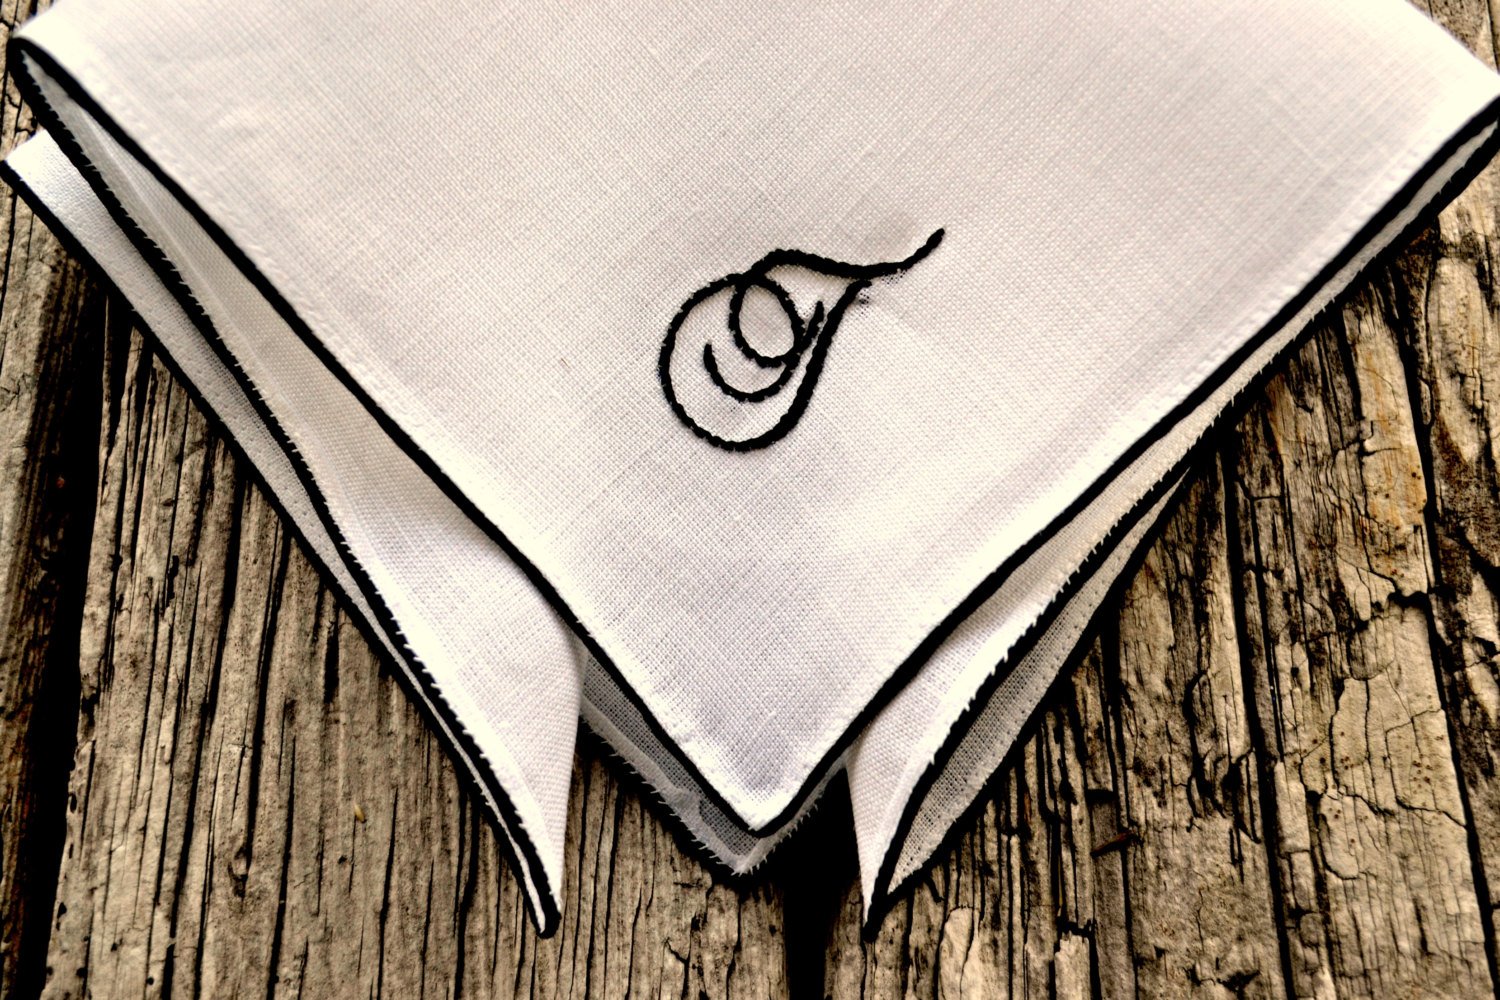 Closeup of hand embroidered pocket square showing stitching detail